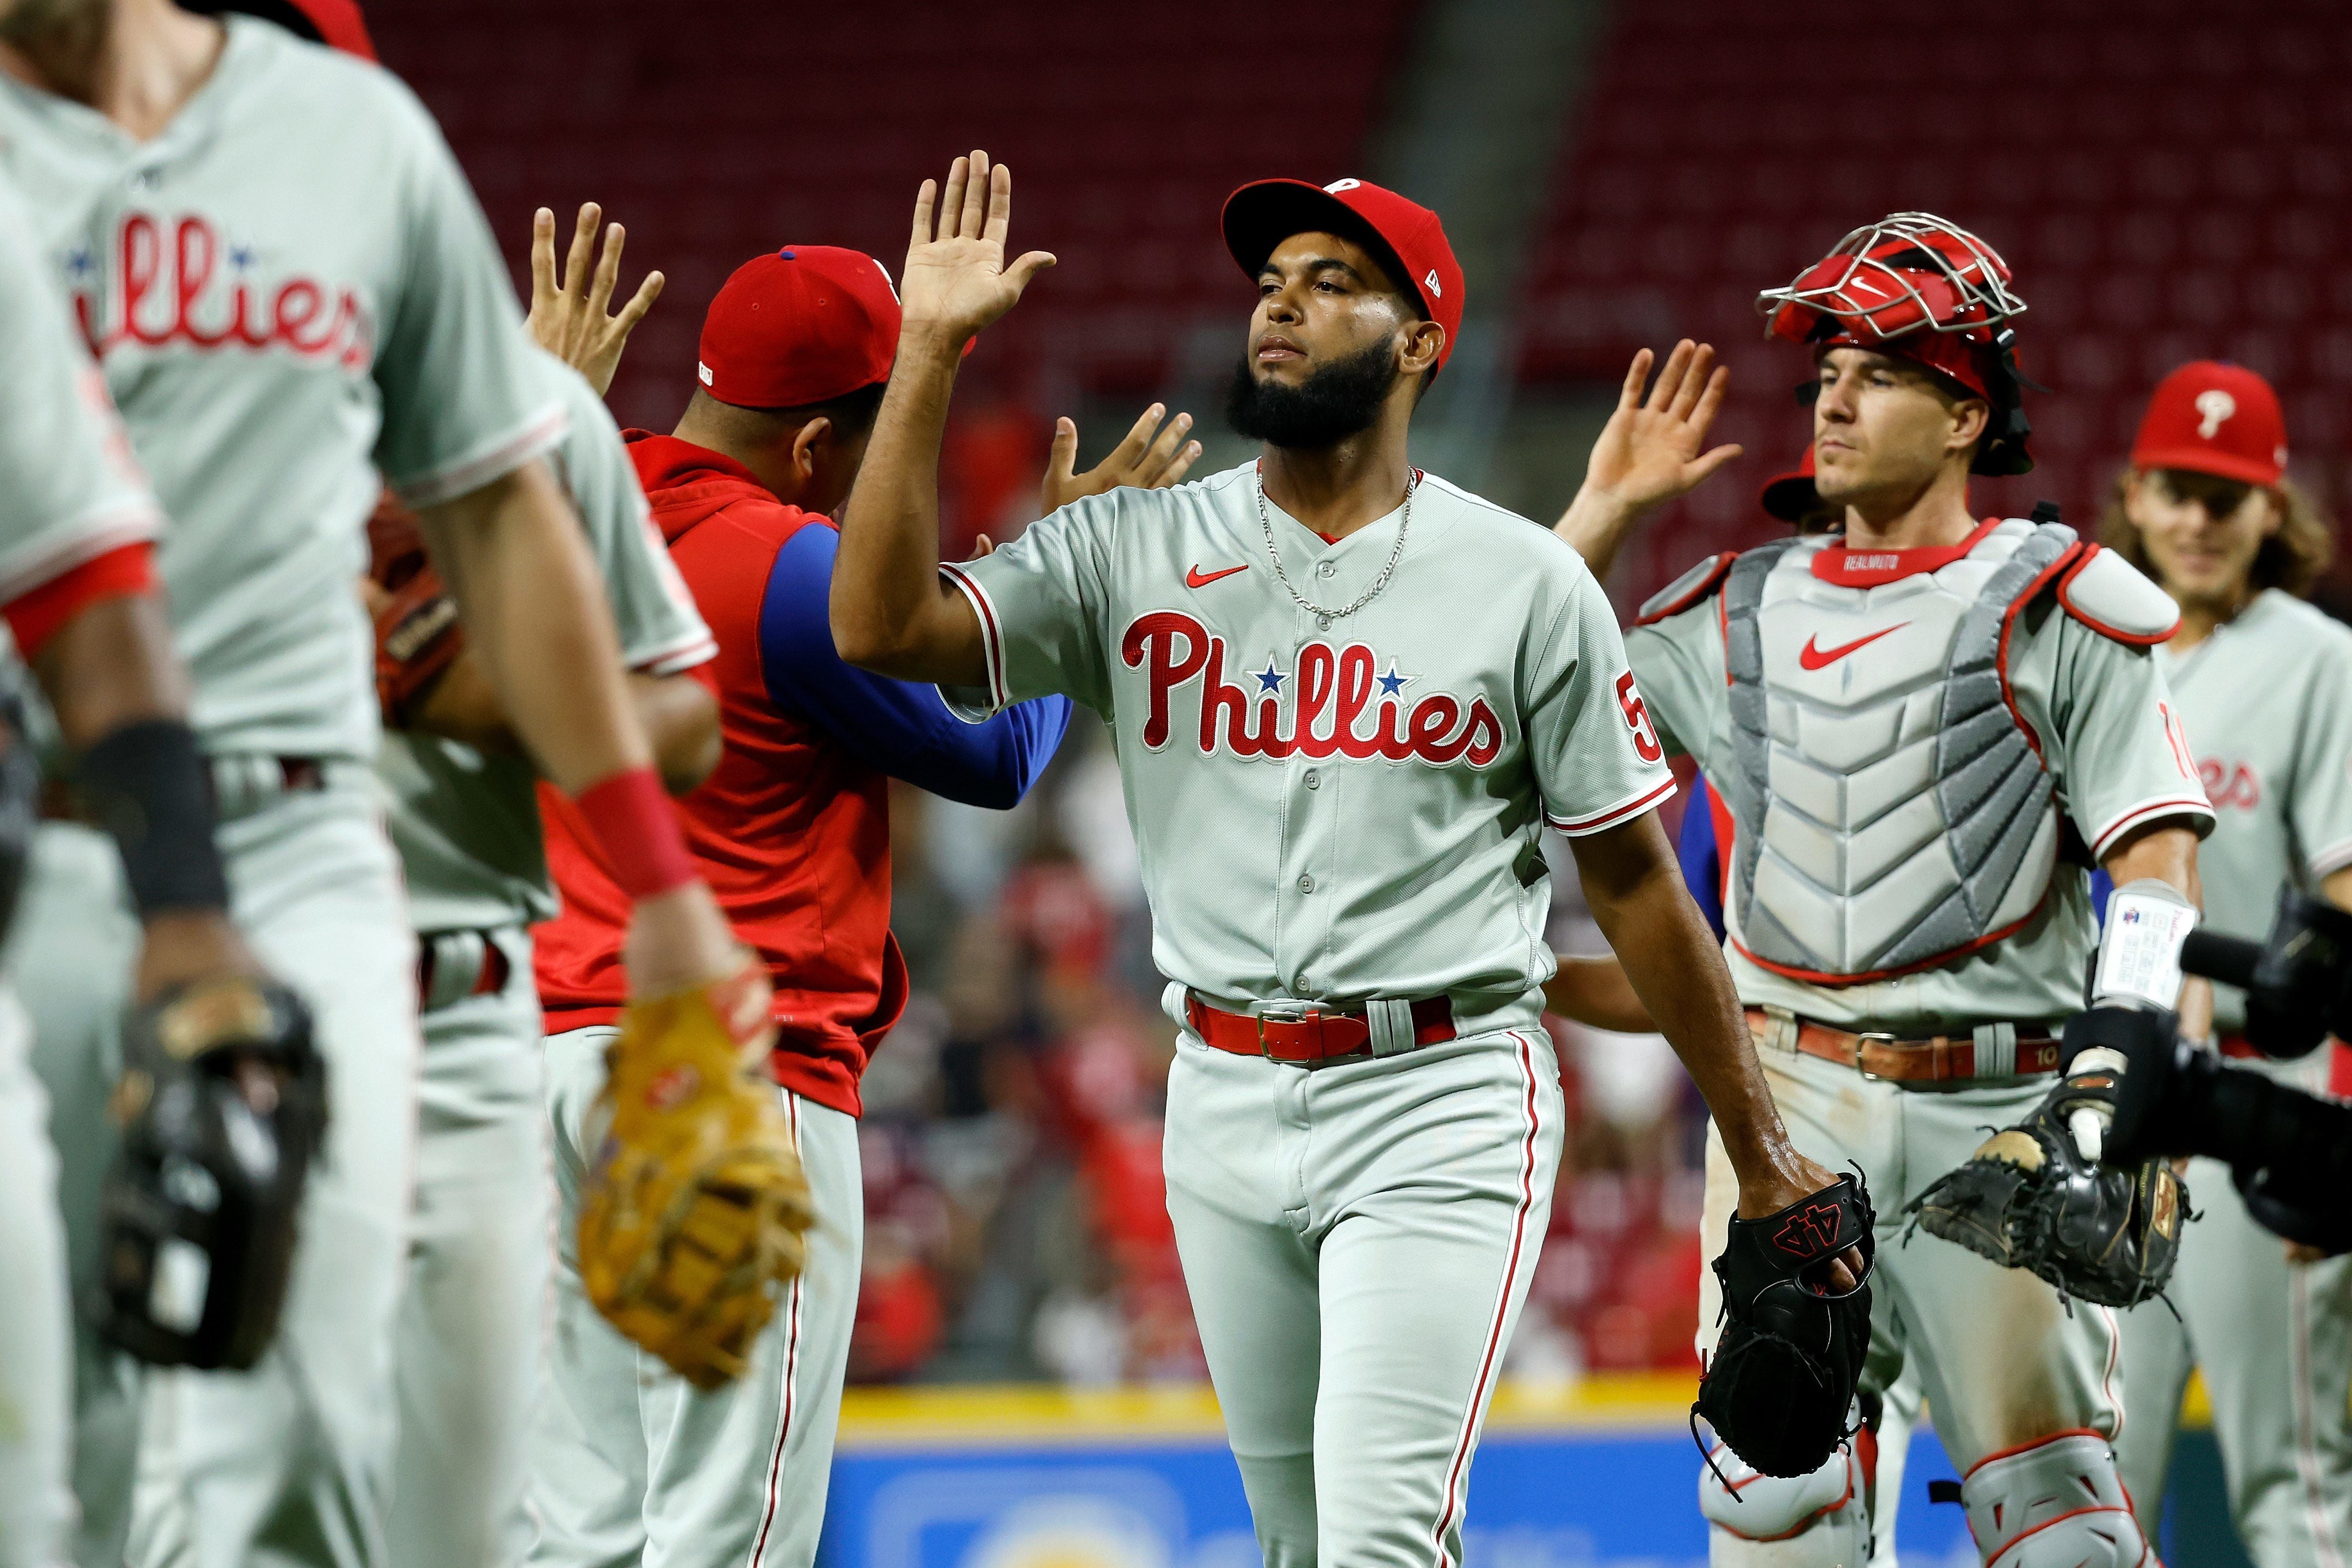 Edmundo Sosa's heroics help seal another win for the Phillies